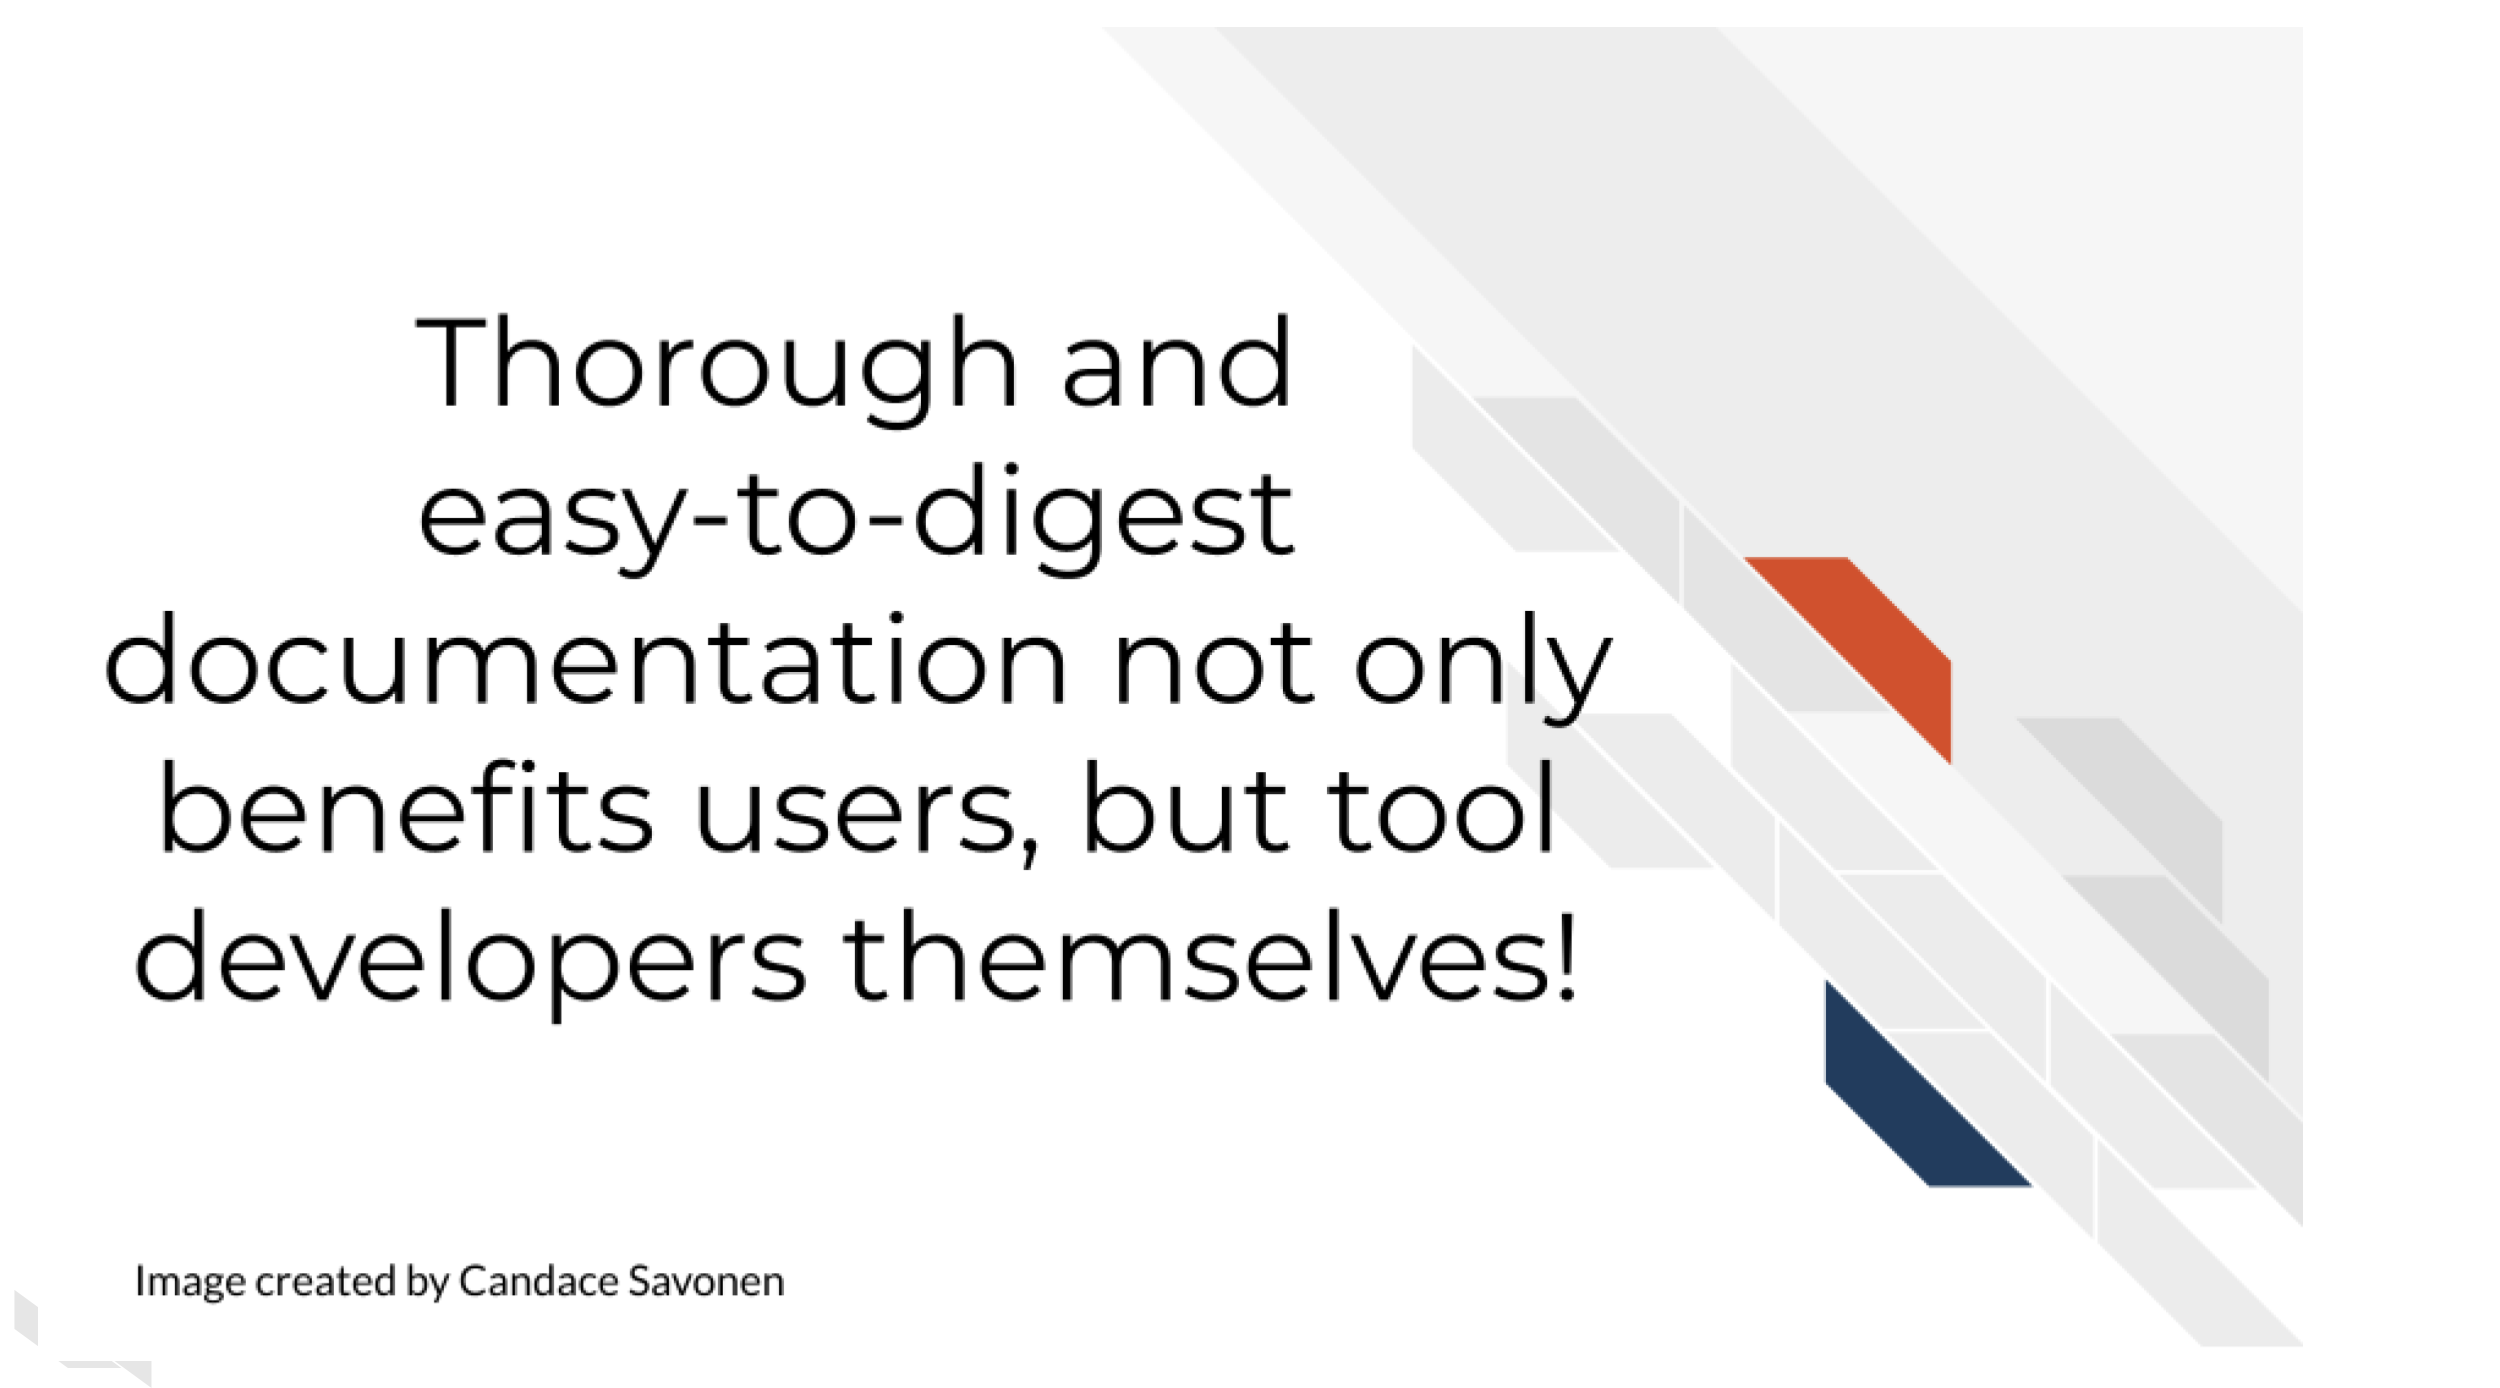 Thorough and easy-to-digest documentation not only benefits users, but tool developers themselves!